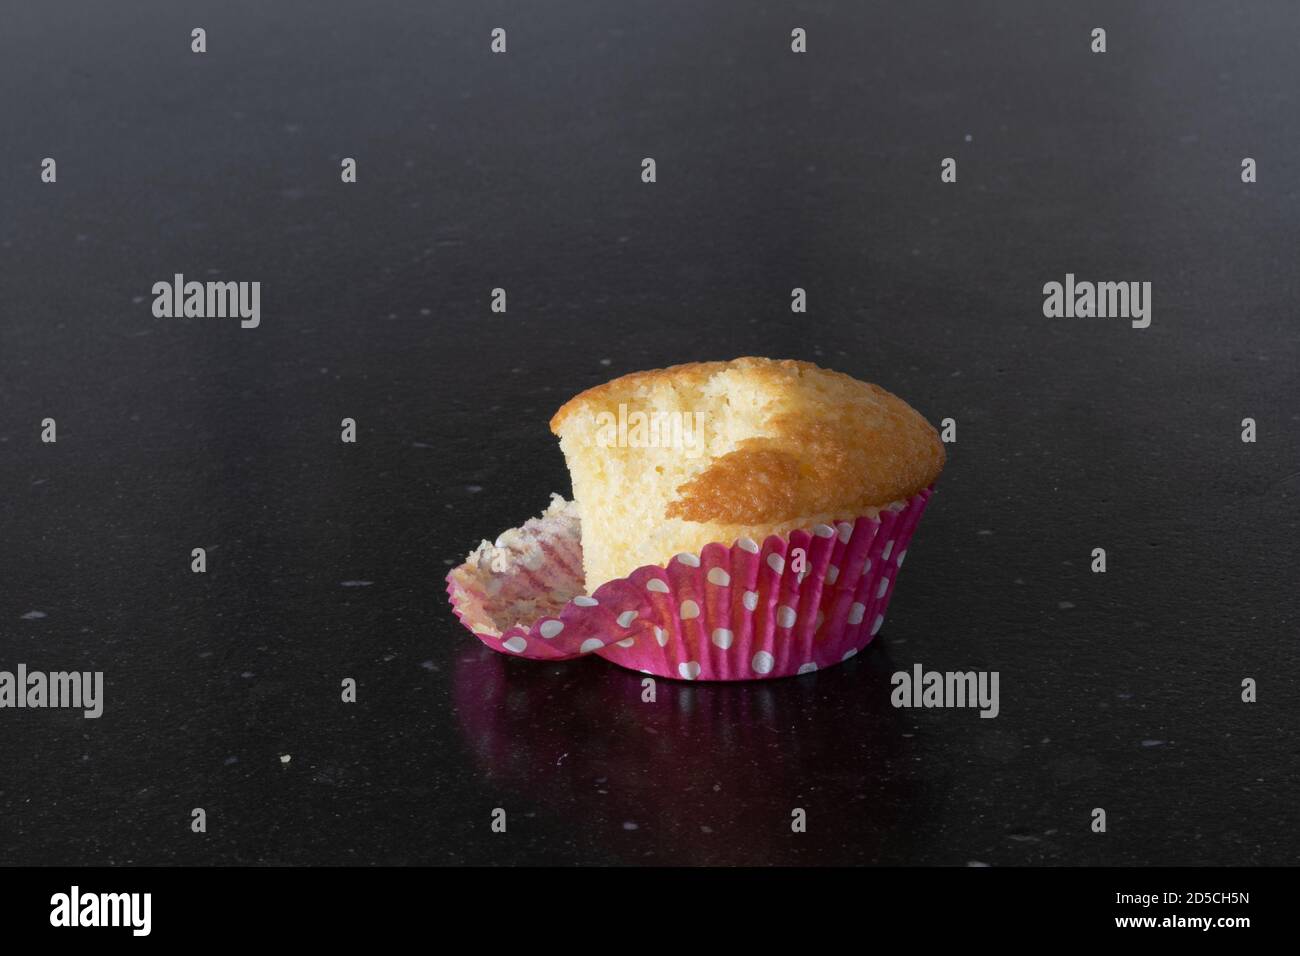 Taking a bite from a plein cupcake, breaking a diet. pink cup with white dots. Dark gray background, kitchen table top Stock Photo